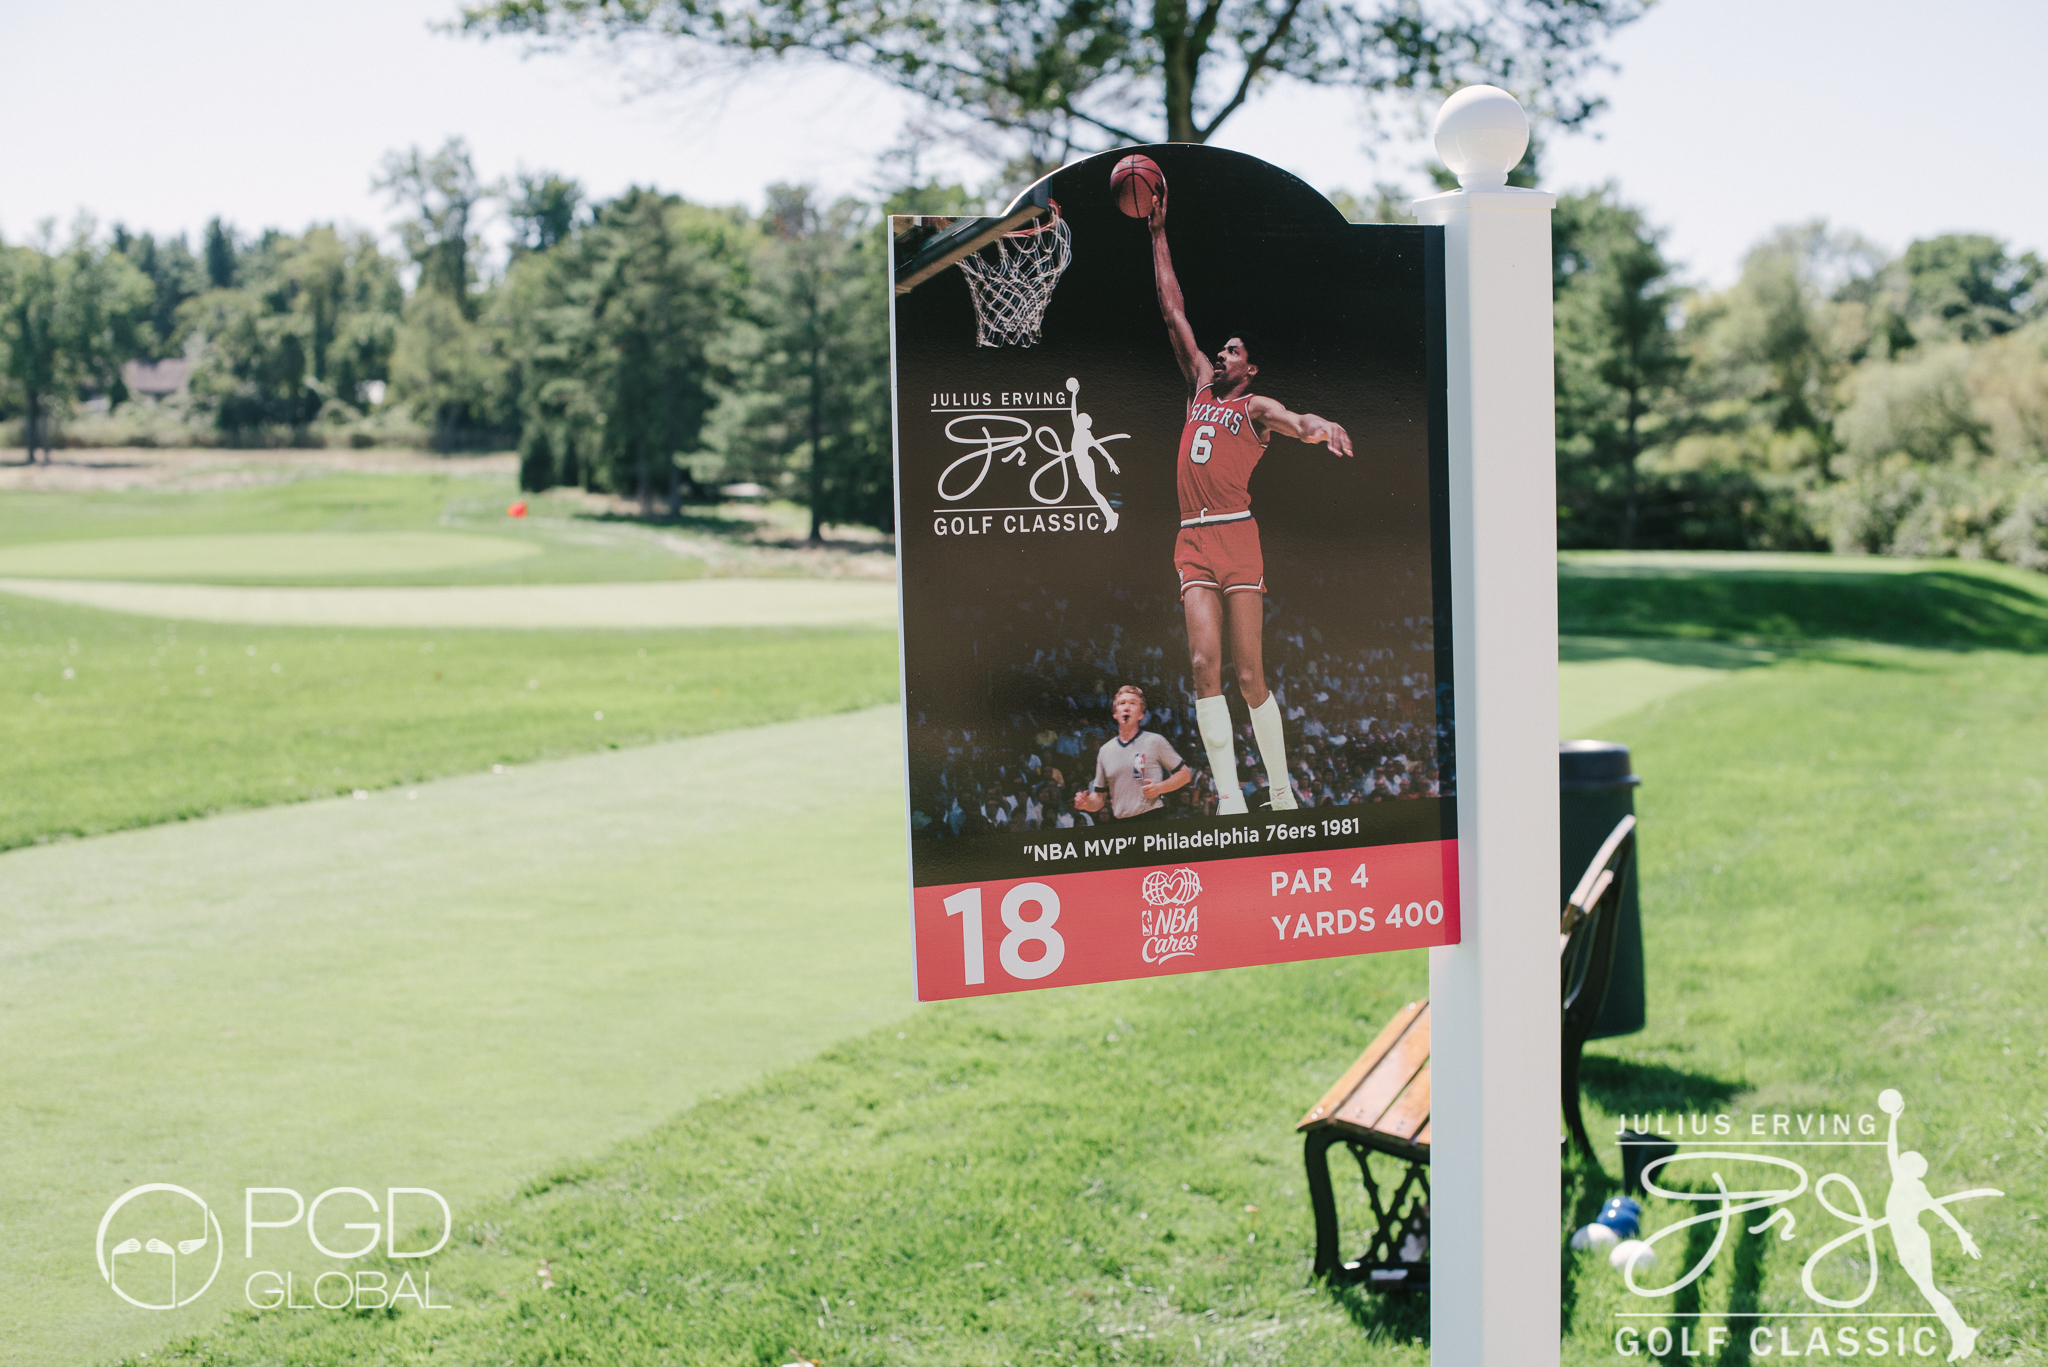 The 18th Hole at the Julius Erving Golf Classic with an iconic image of Julius' illustrious career